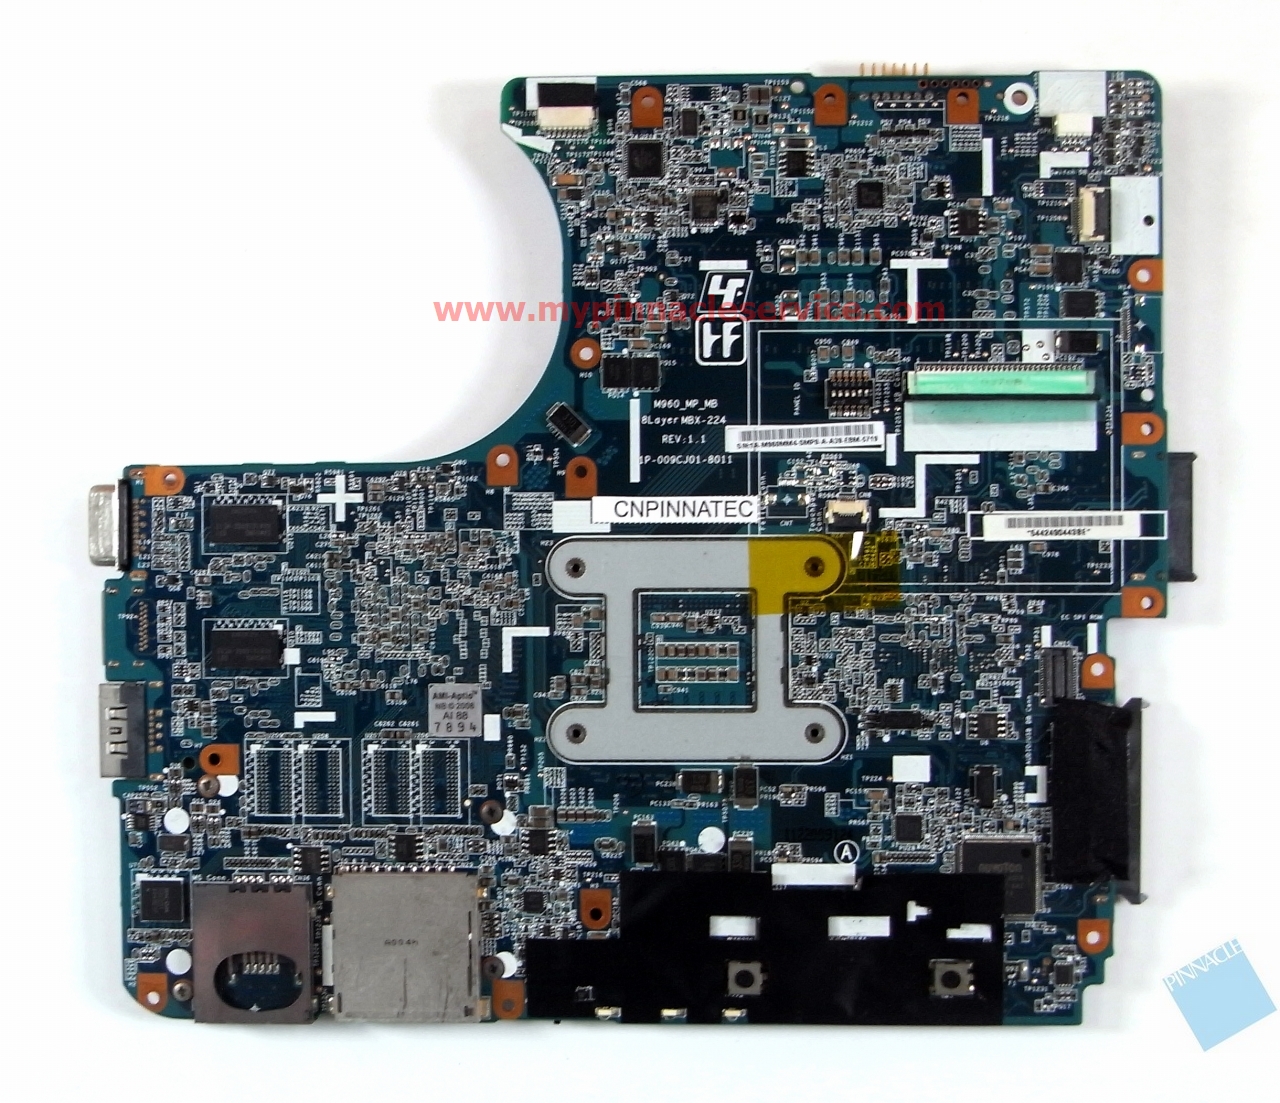 a1780052a-motherboard-for-sony-vaio-vpc-ea-series-mbx-224-m960-rimg0231.jpg